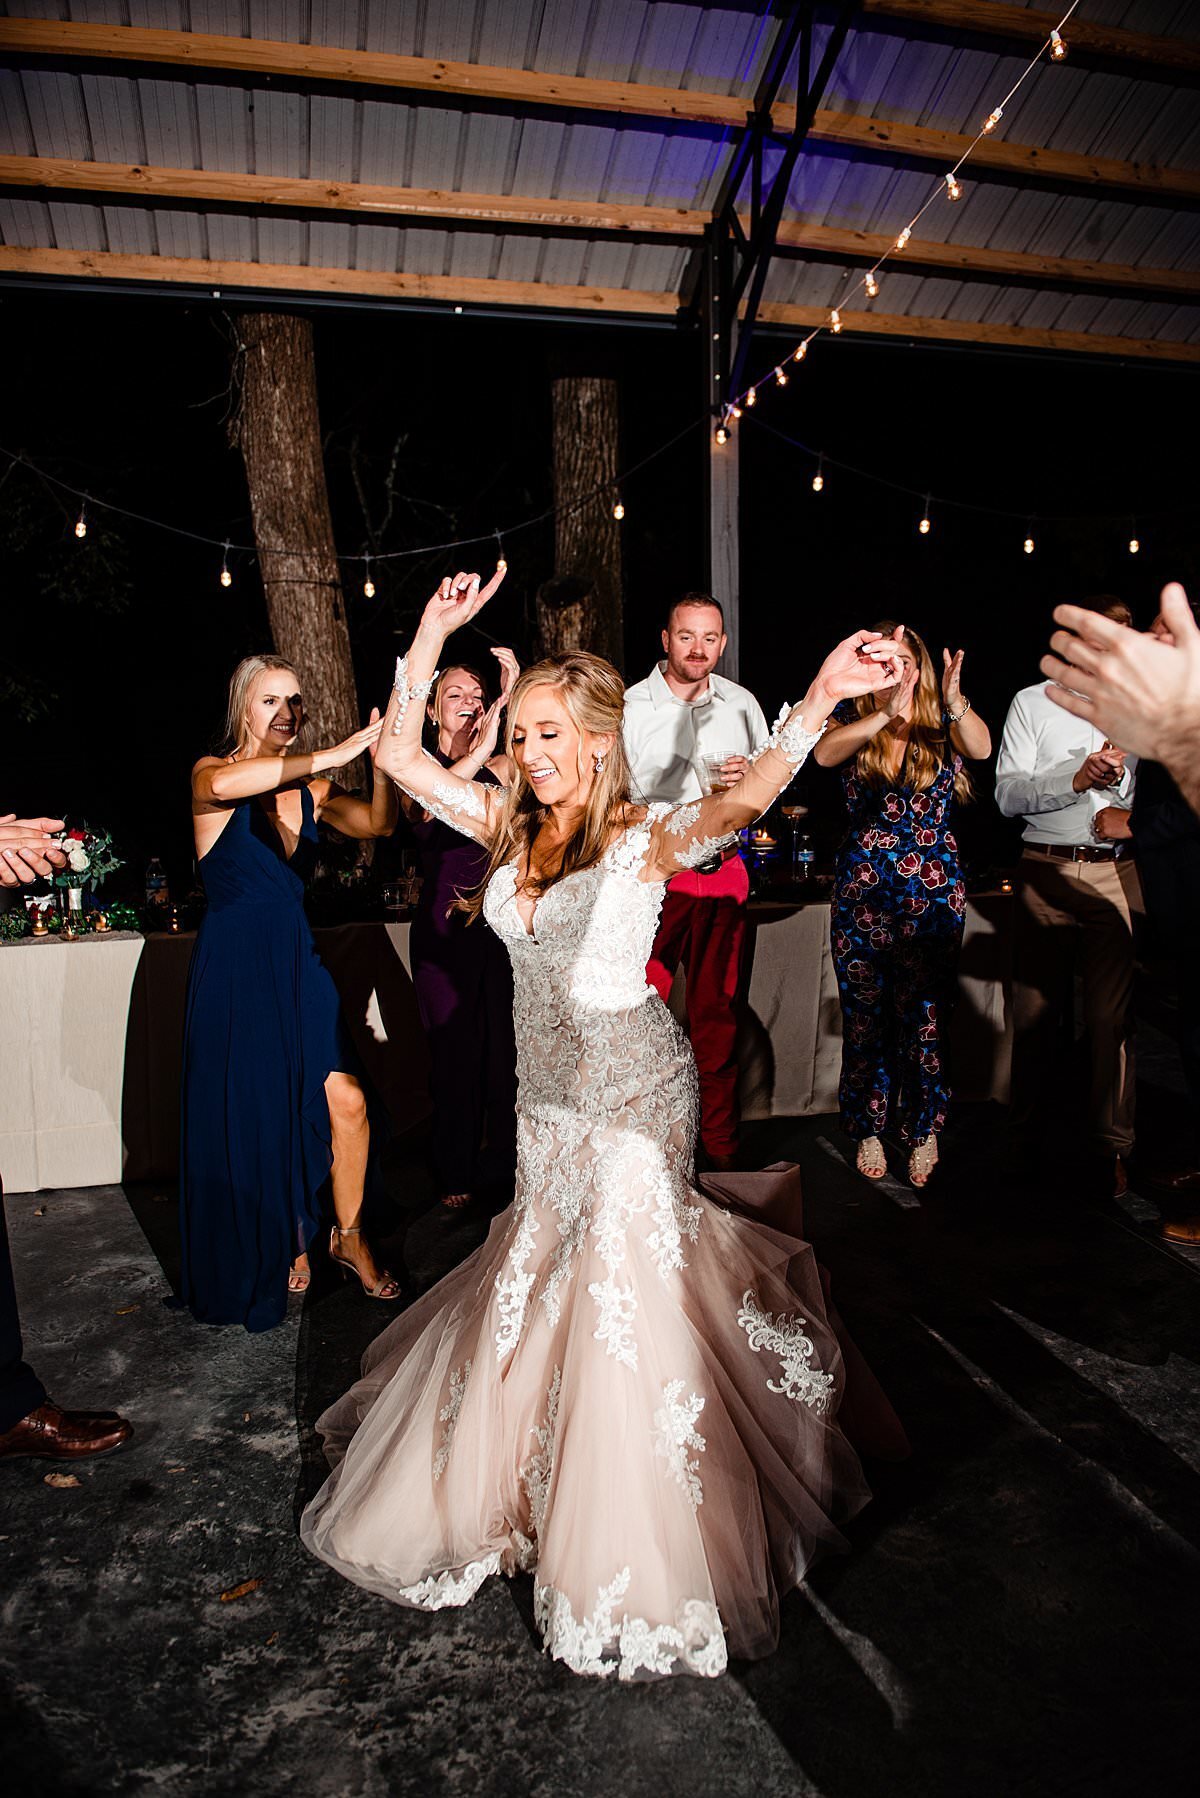 Bride dancing in the middle of her guests during reception